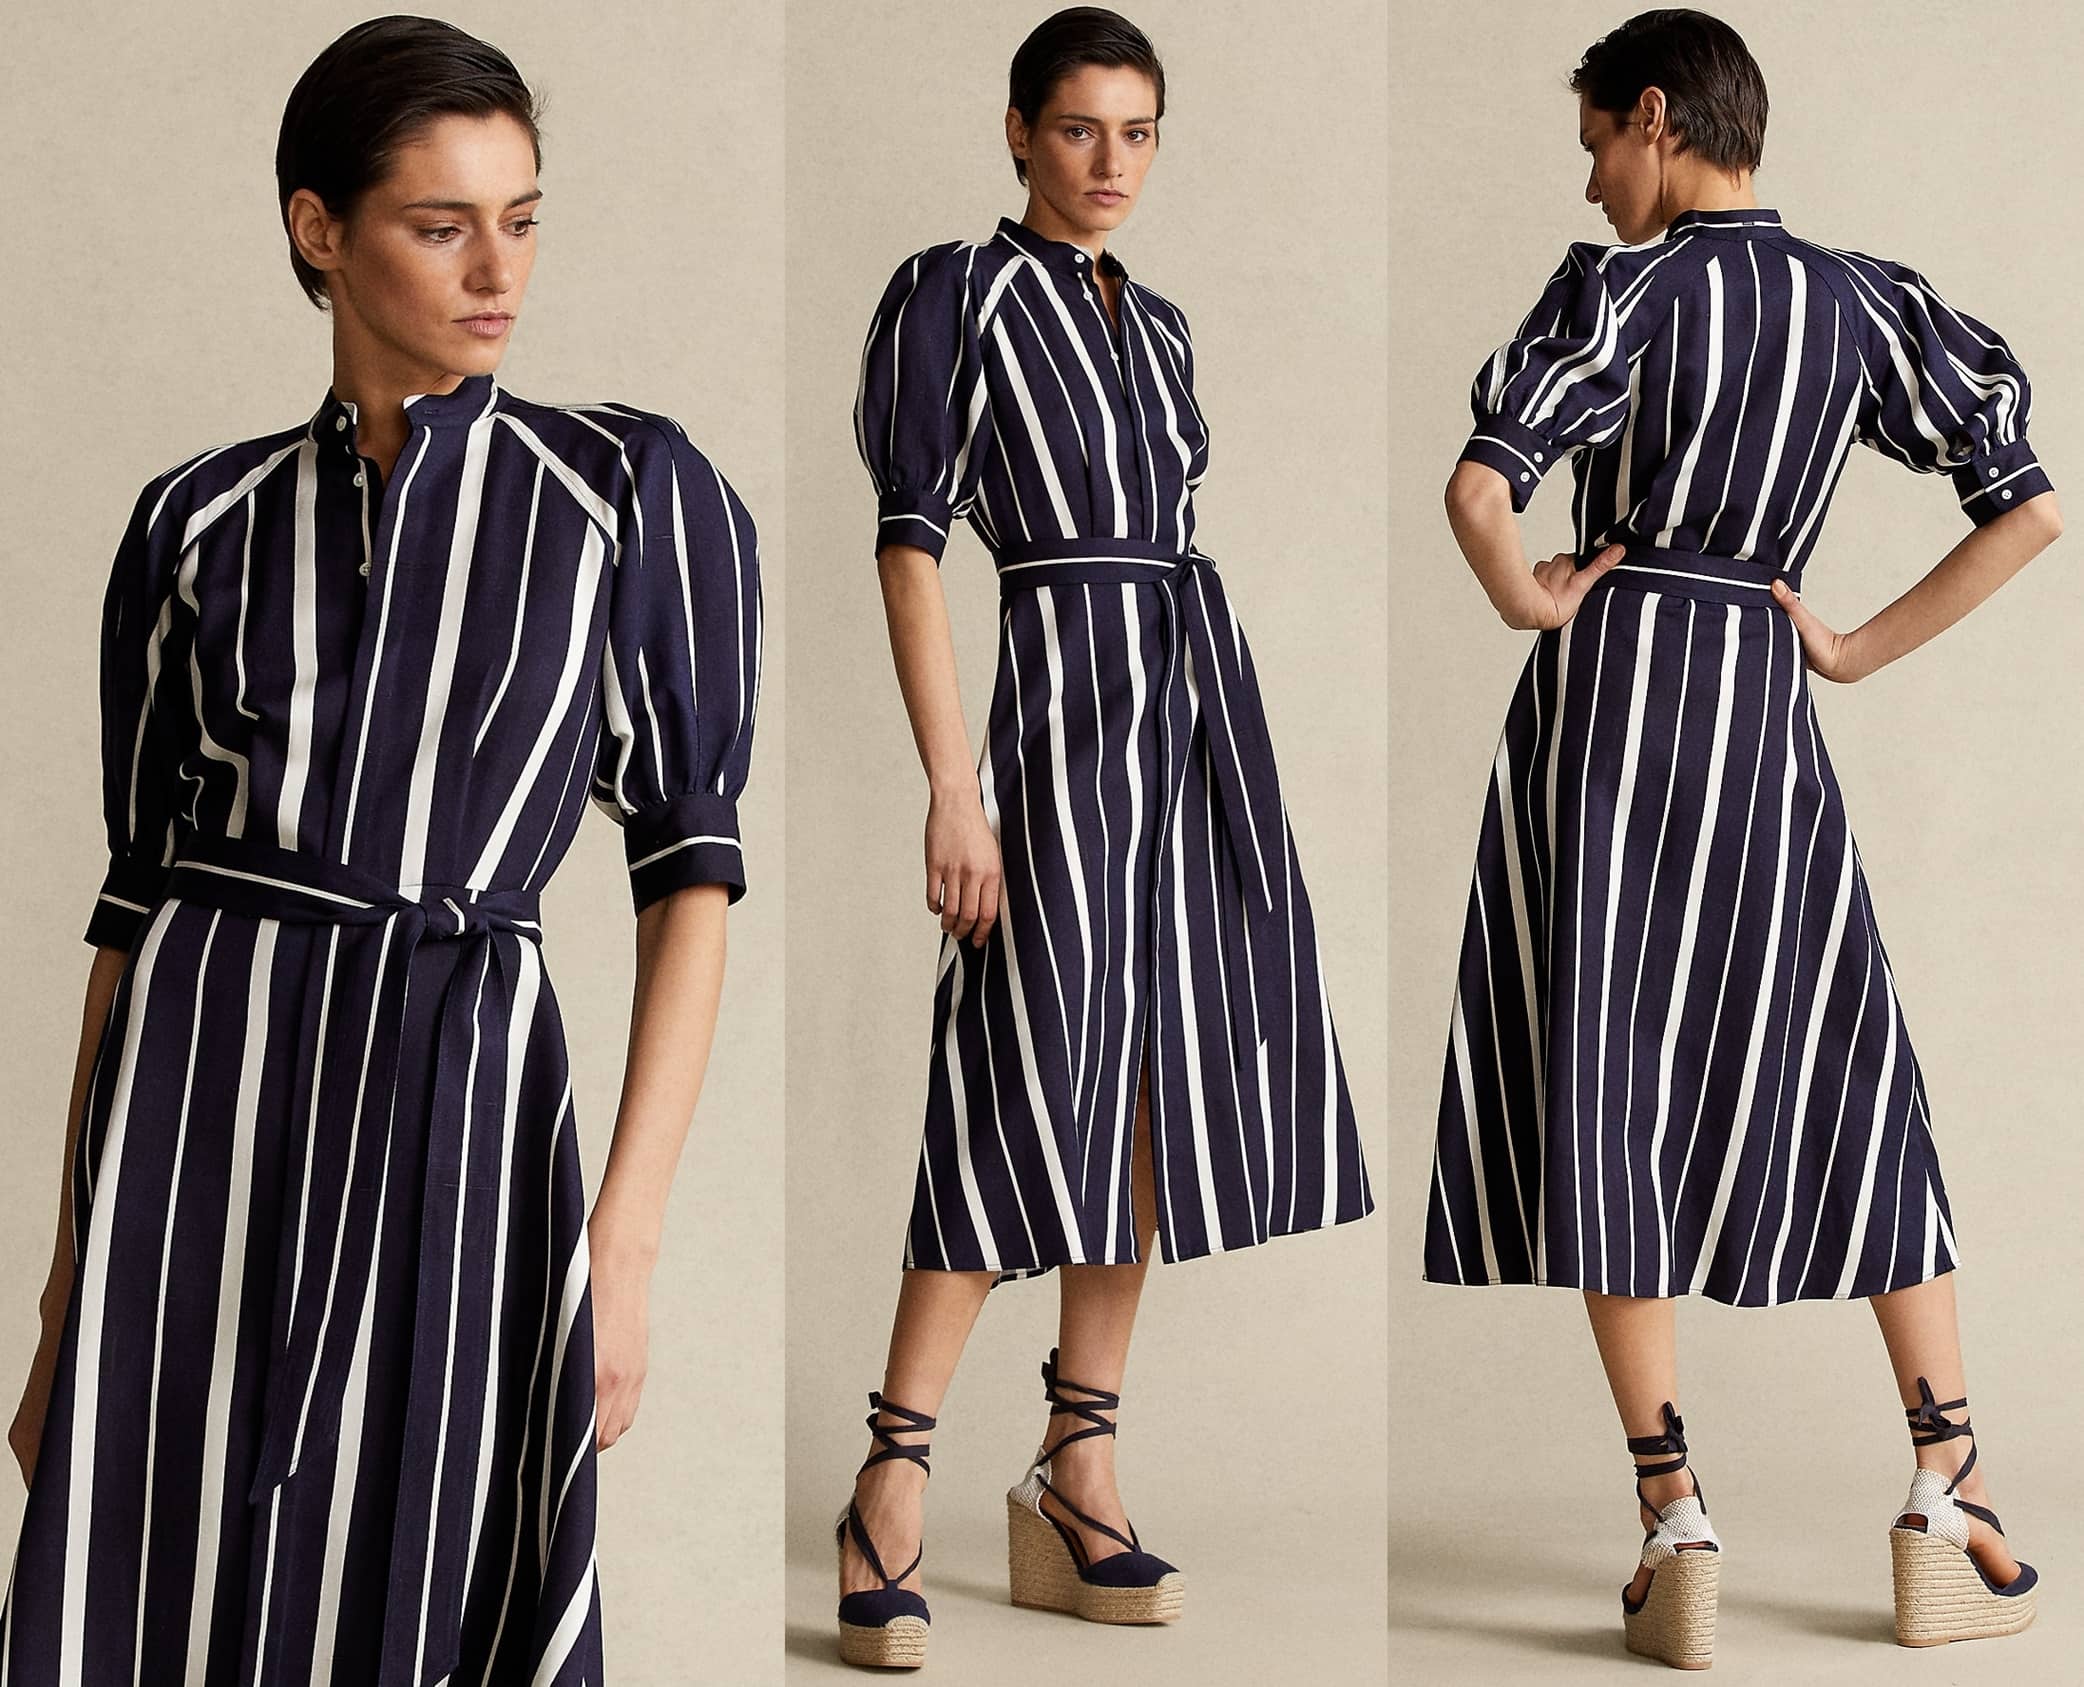 Cut for an A-line silhouette, this navy/cream stripe dress is crafted from pure silk for a fluid drape and easy movement